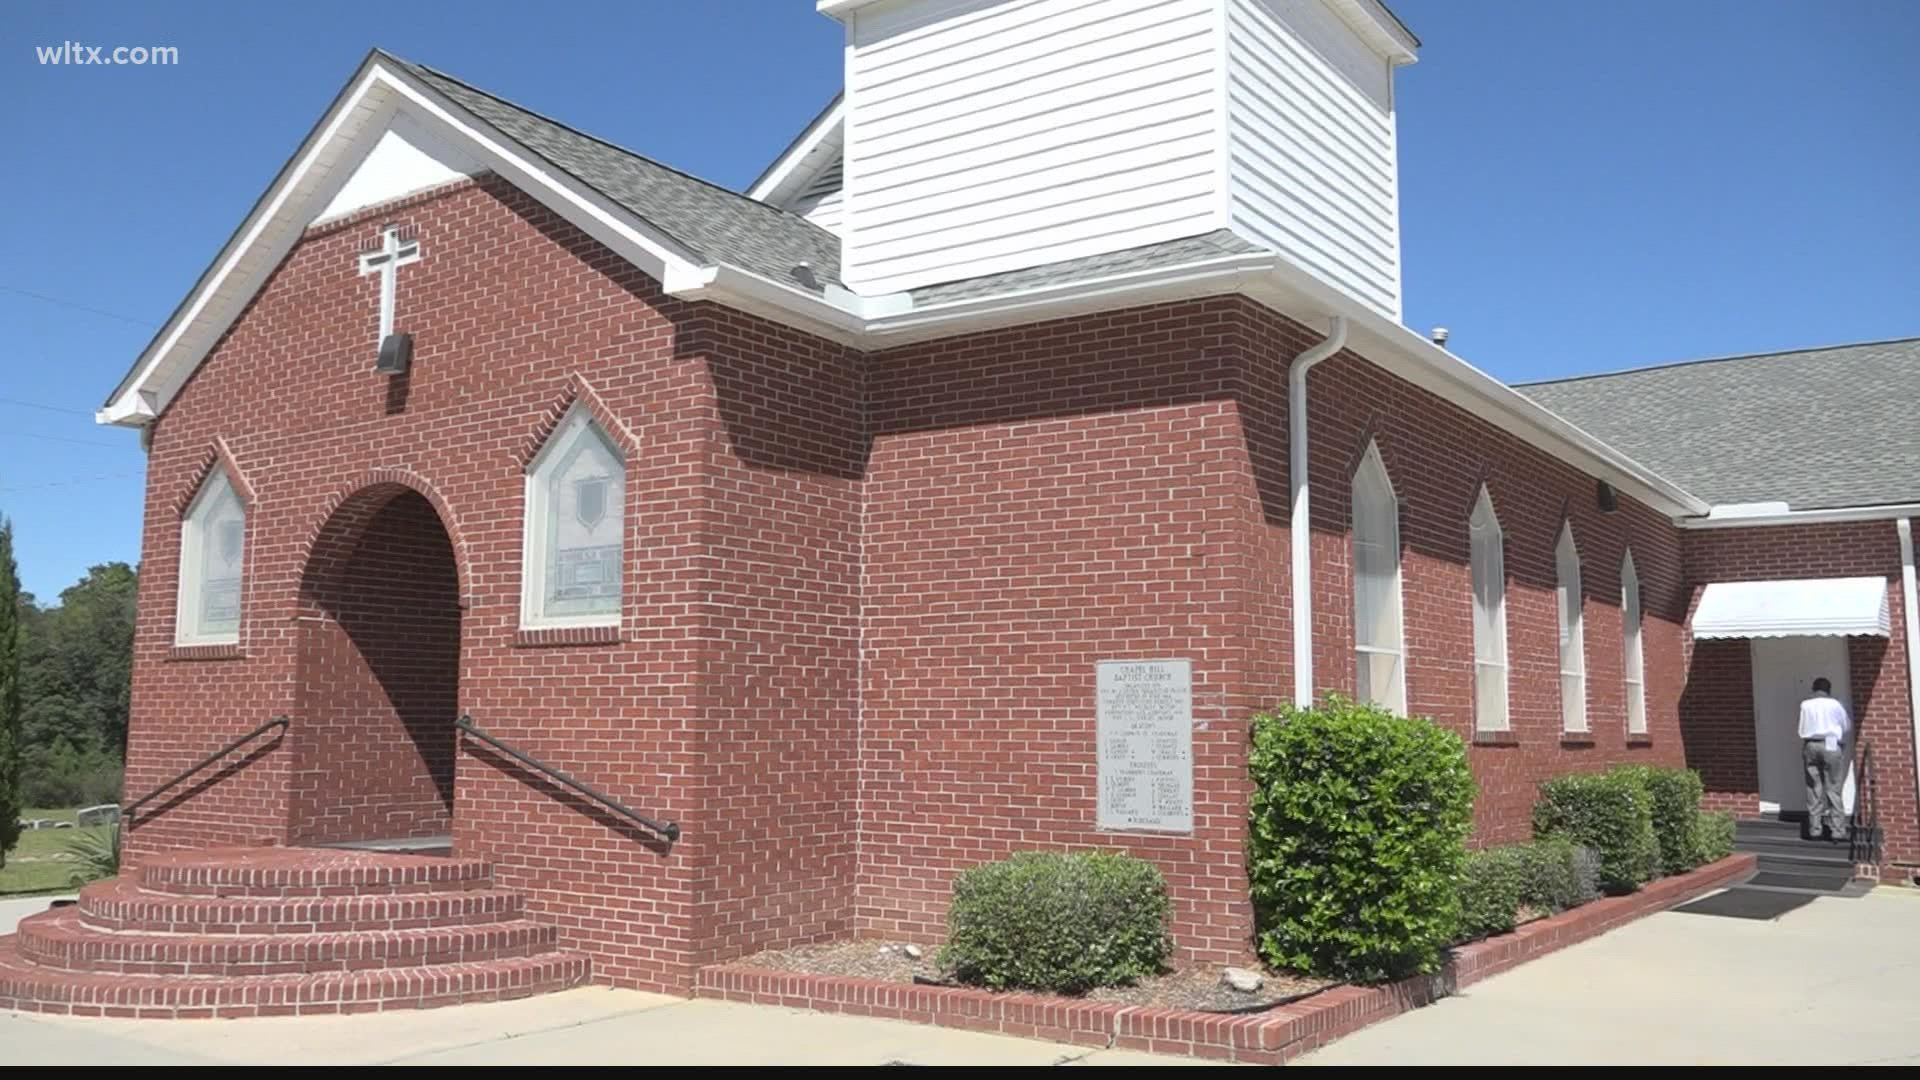 Members of Chapel Hill Baptist are inviting the community to celebrate the church's founding 142 years ago on September 26th.